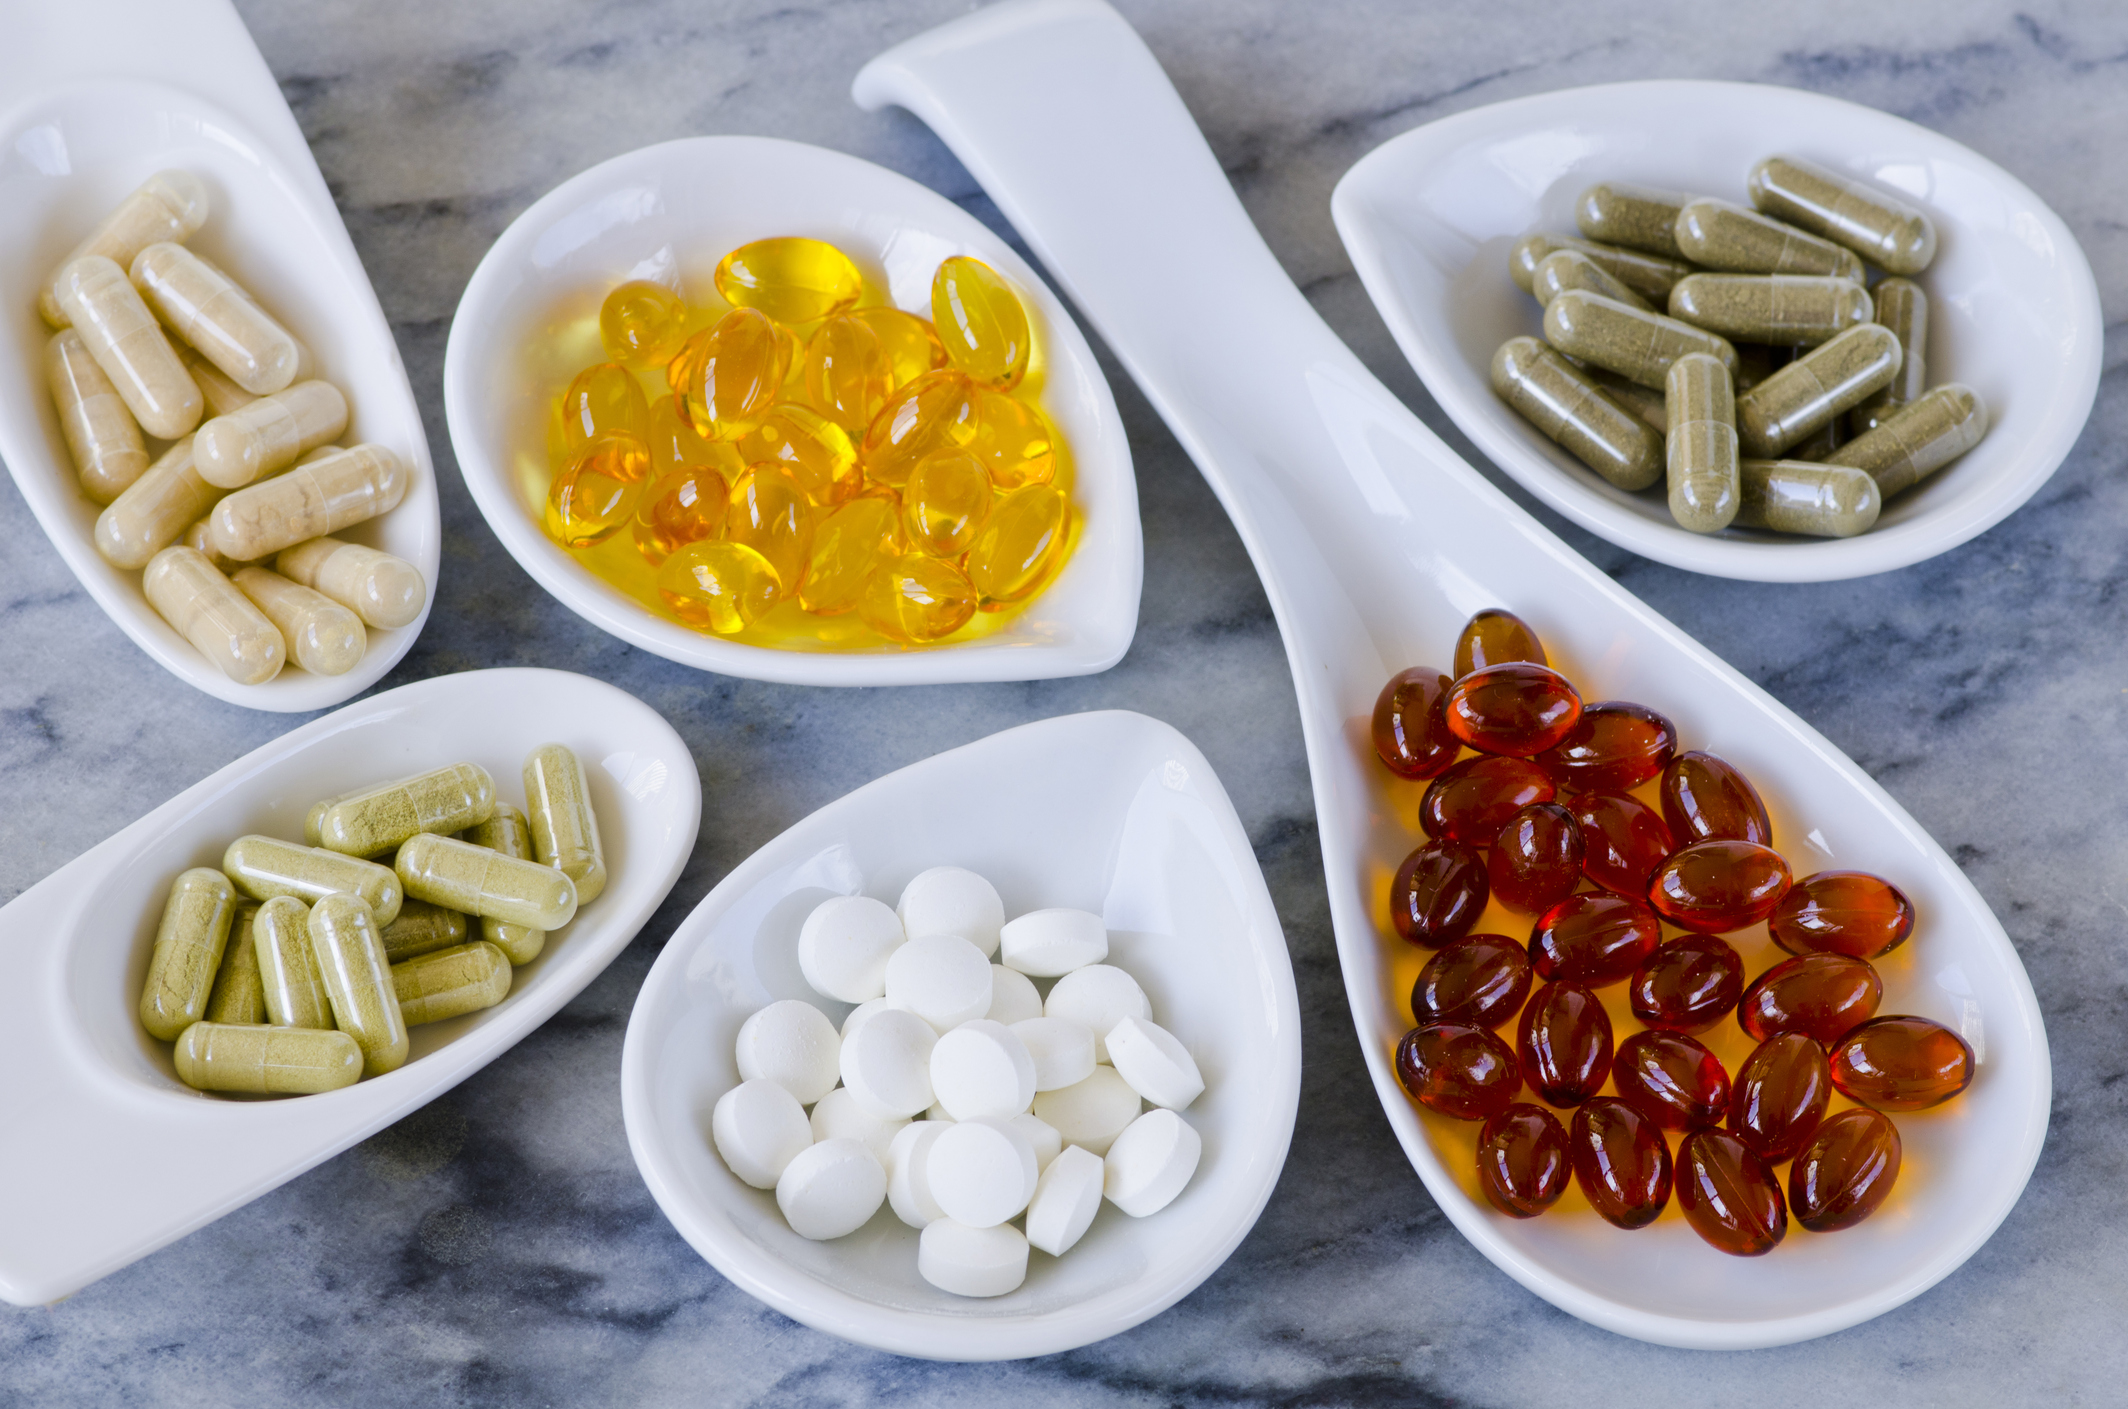 Are Diet Supplements Safe